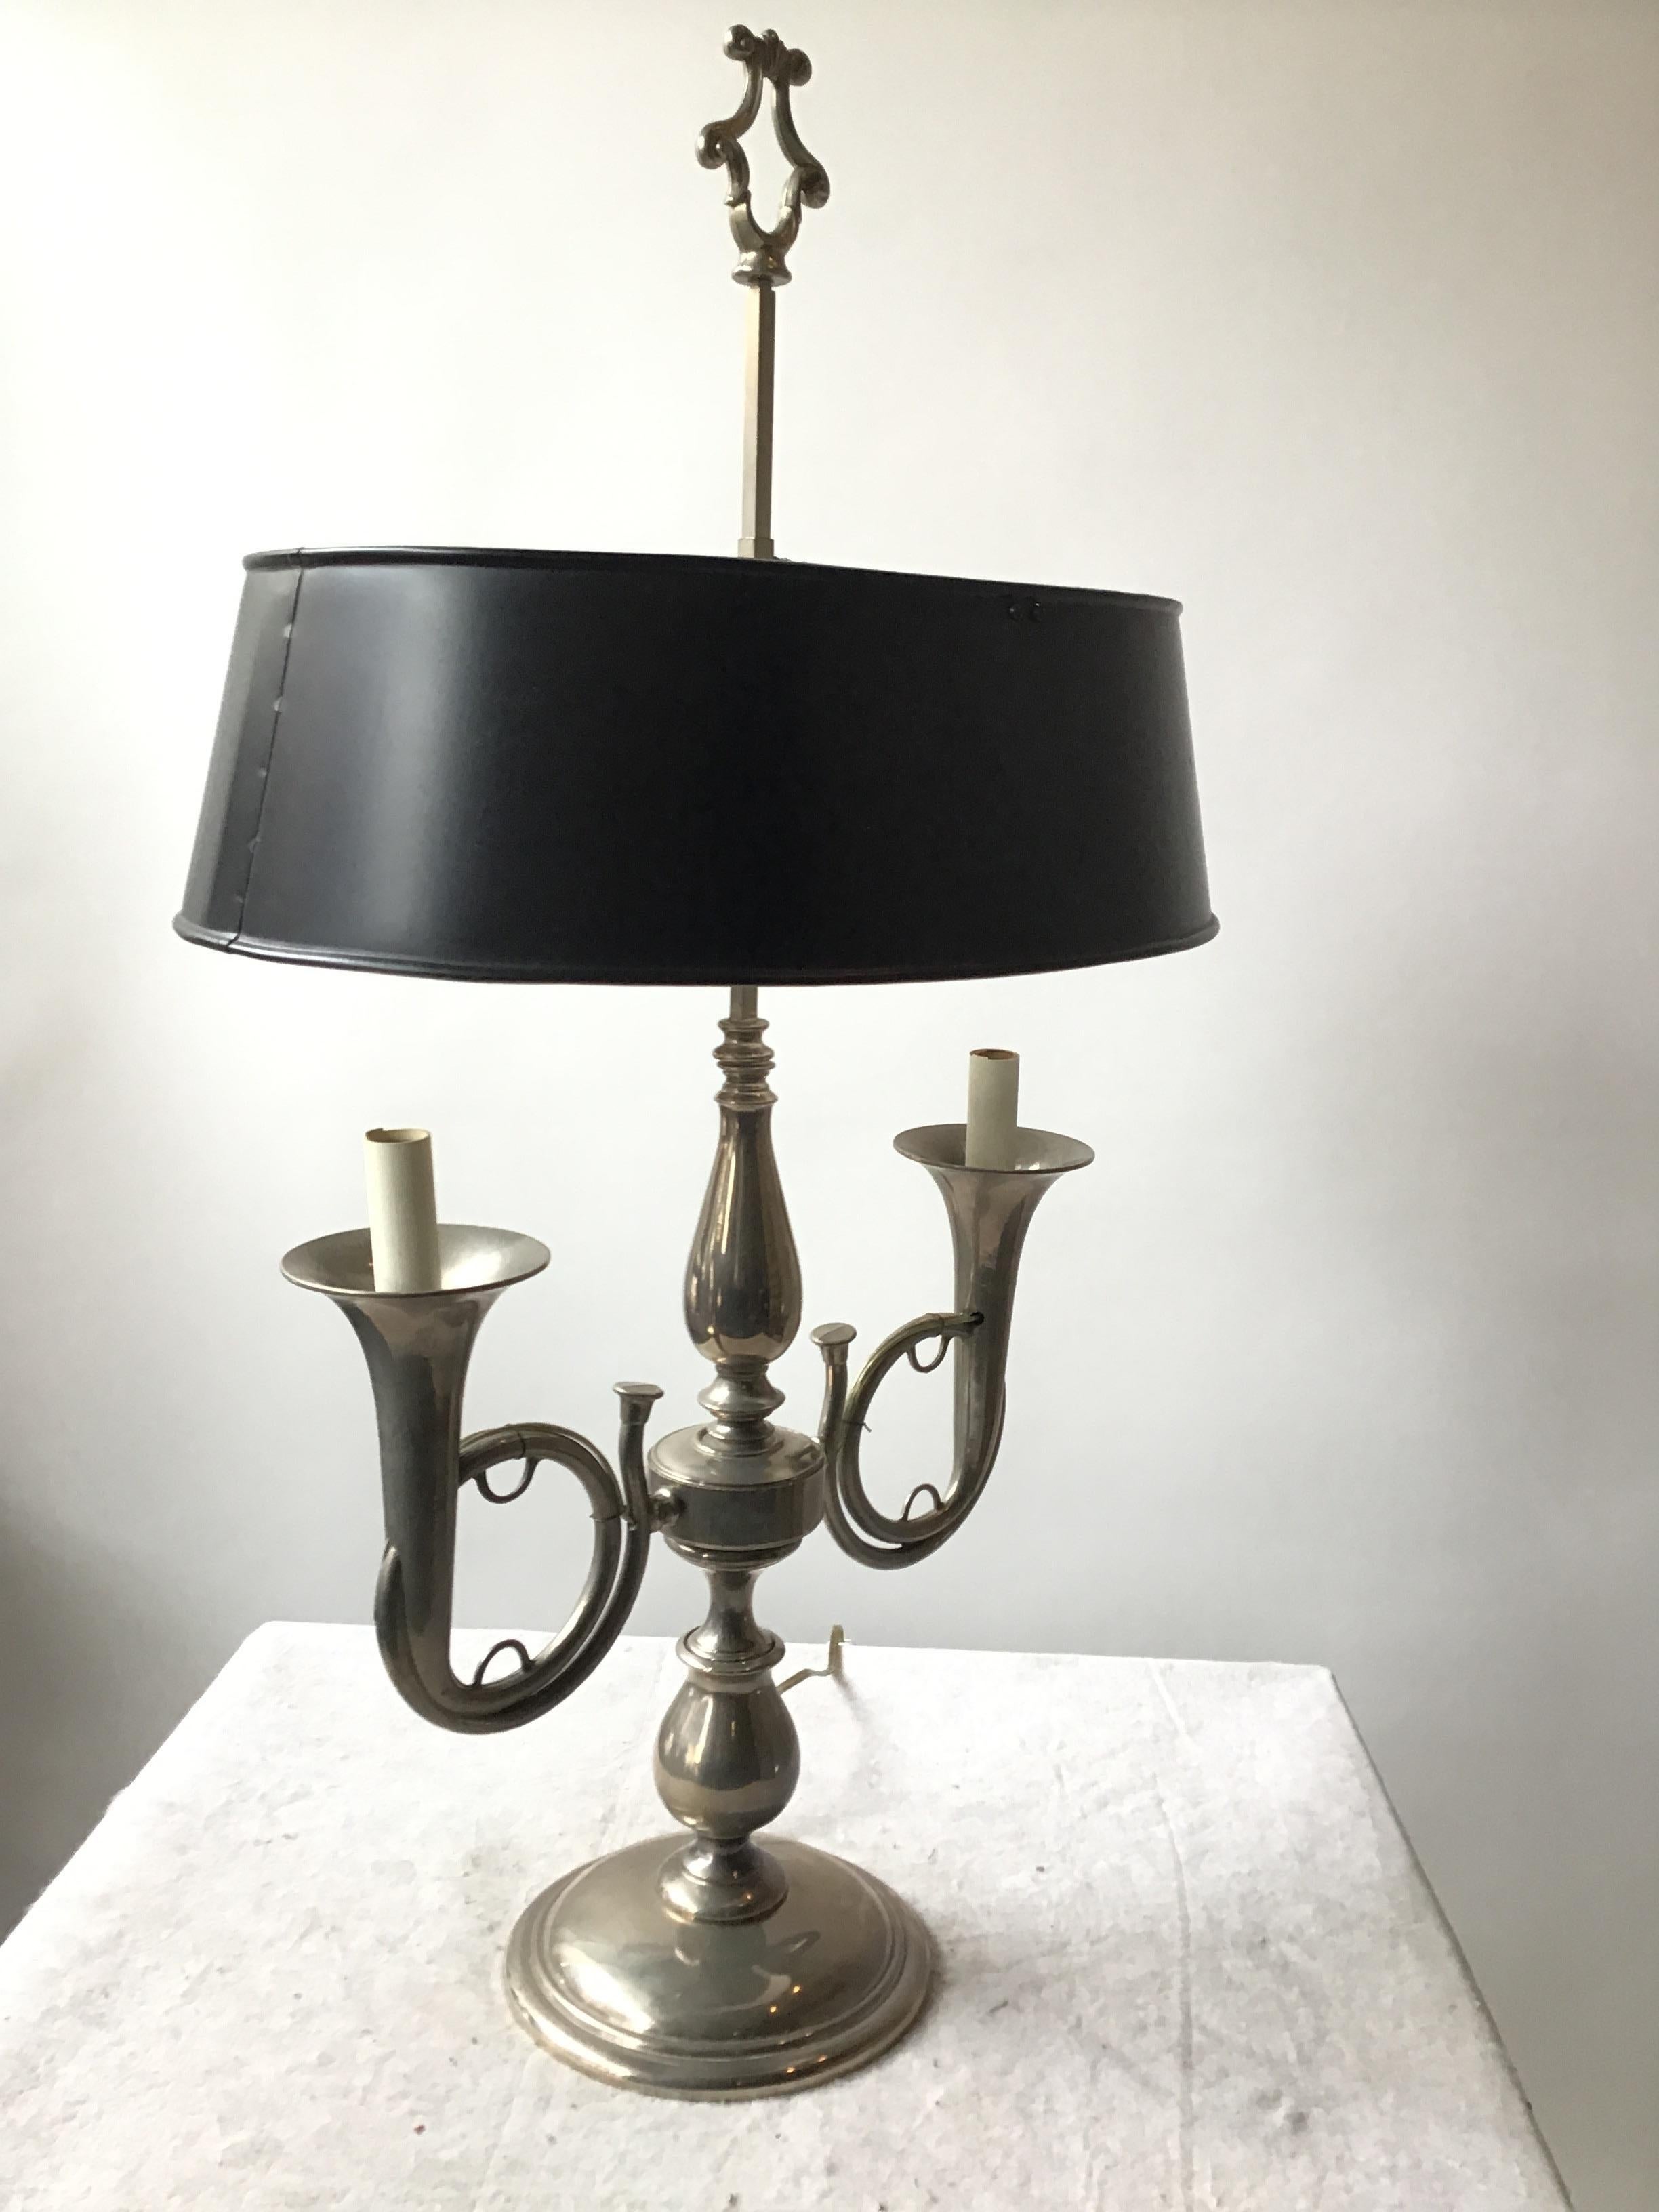 1970s pewter trumpet lamp with adjustable tole shade.